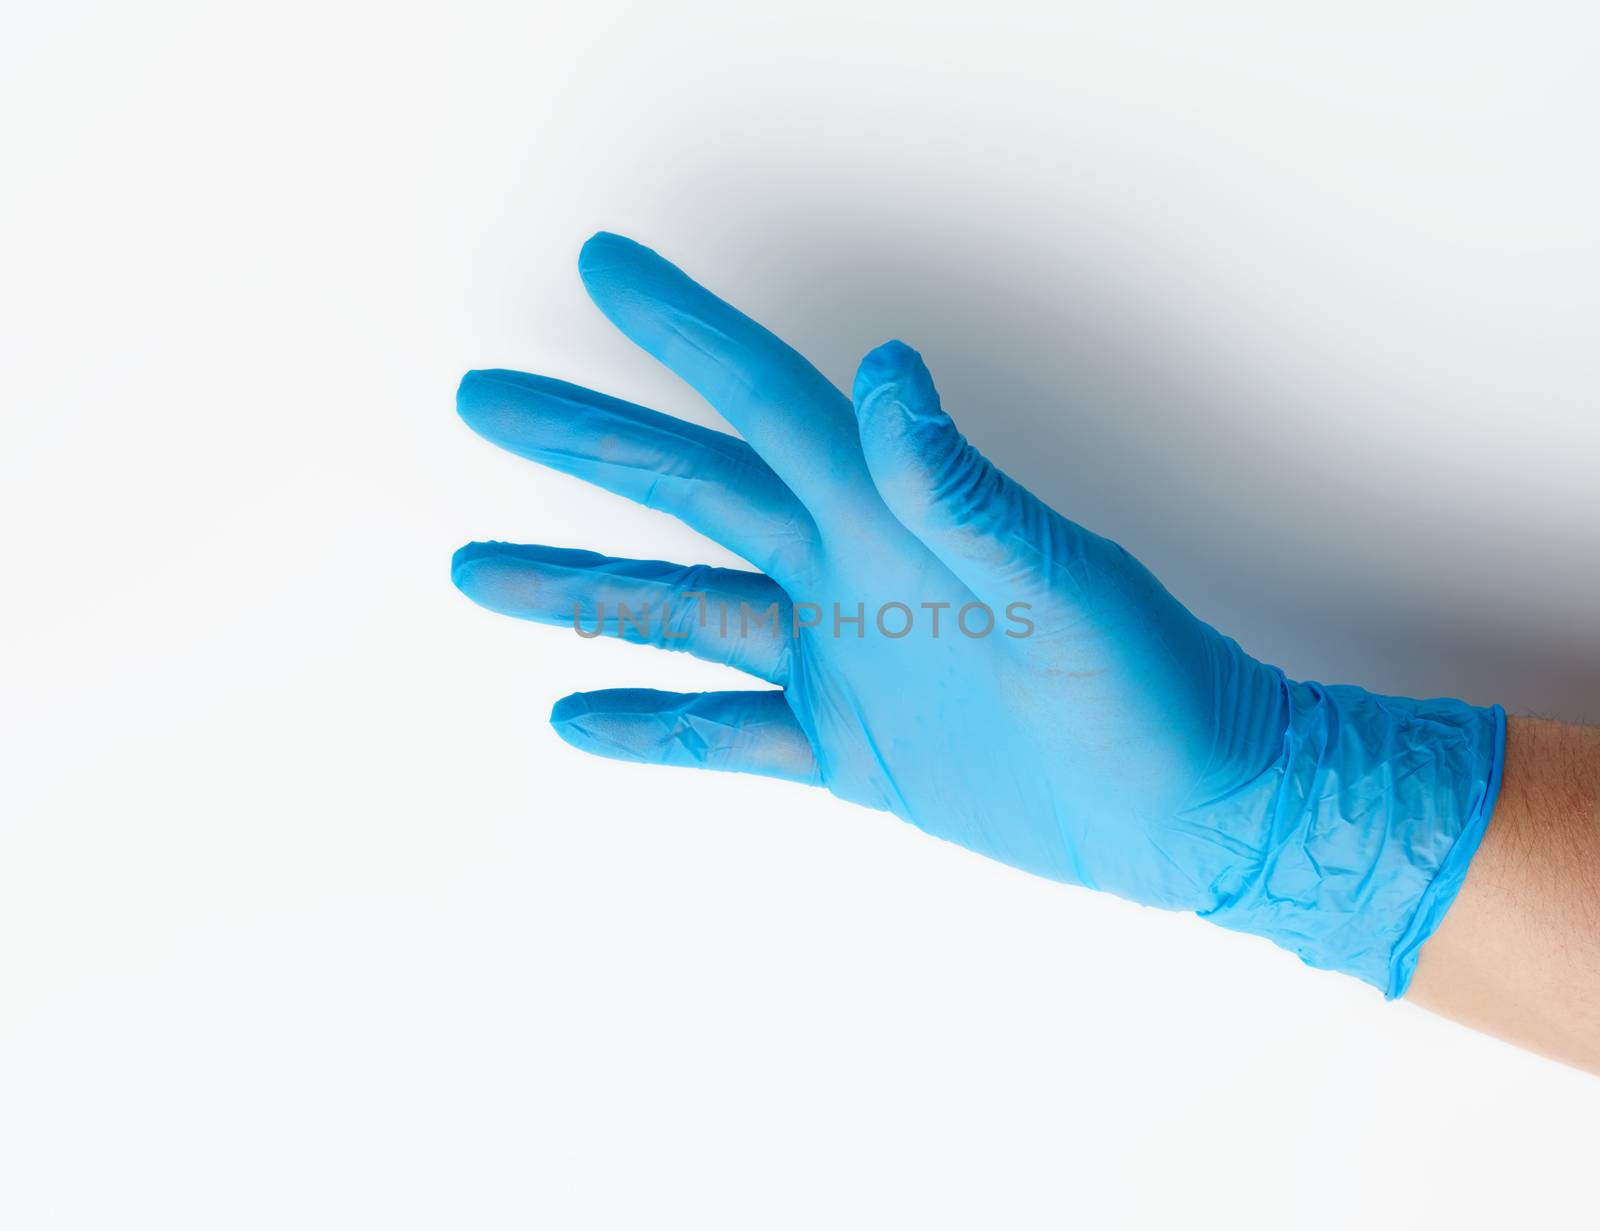 blue medical glove is worn on the arm, part of the body on a whi by ndanko